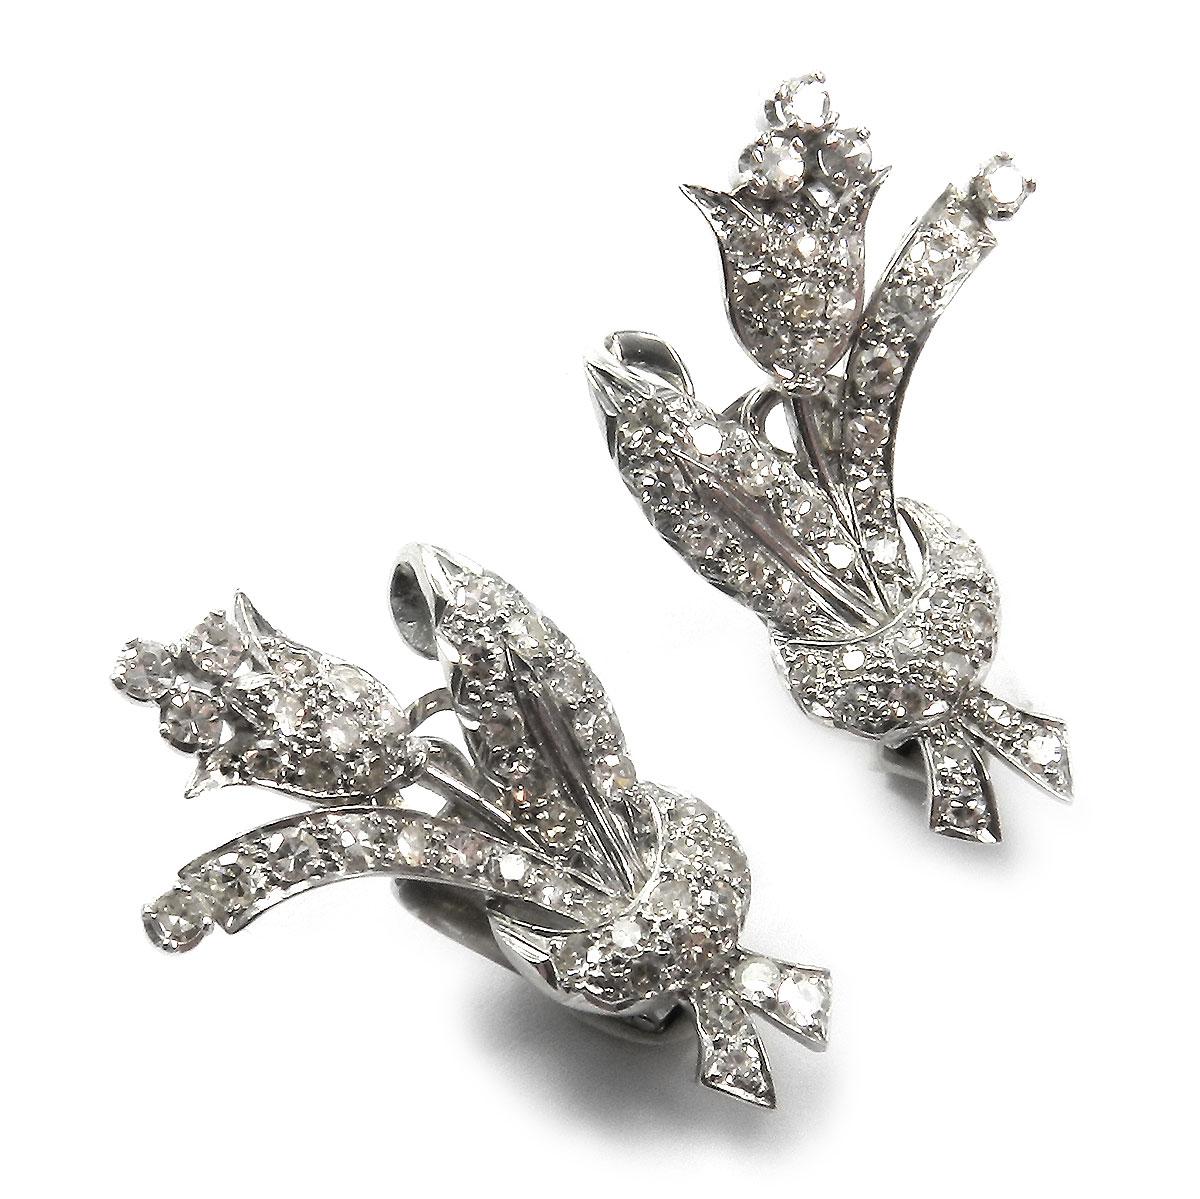 Diamond Platinum Clip on Flower Earrings, circa 1940

Decorative clip-on earrings designed as a pair of flowers, set with sparkling brilliant-cut diamonds in total approx. 2.0 carat.

platinum
total approx. 2.0 carat brillant-cut diamonds, HN /